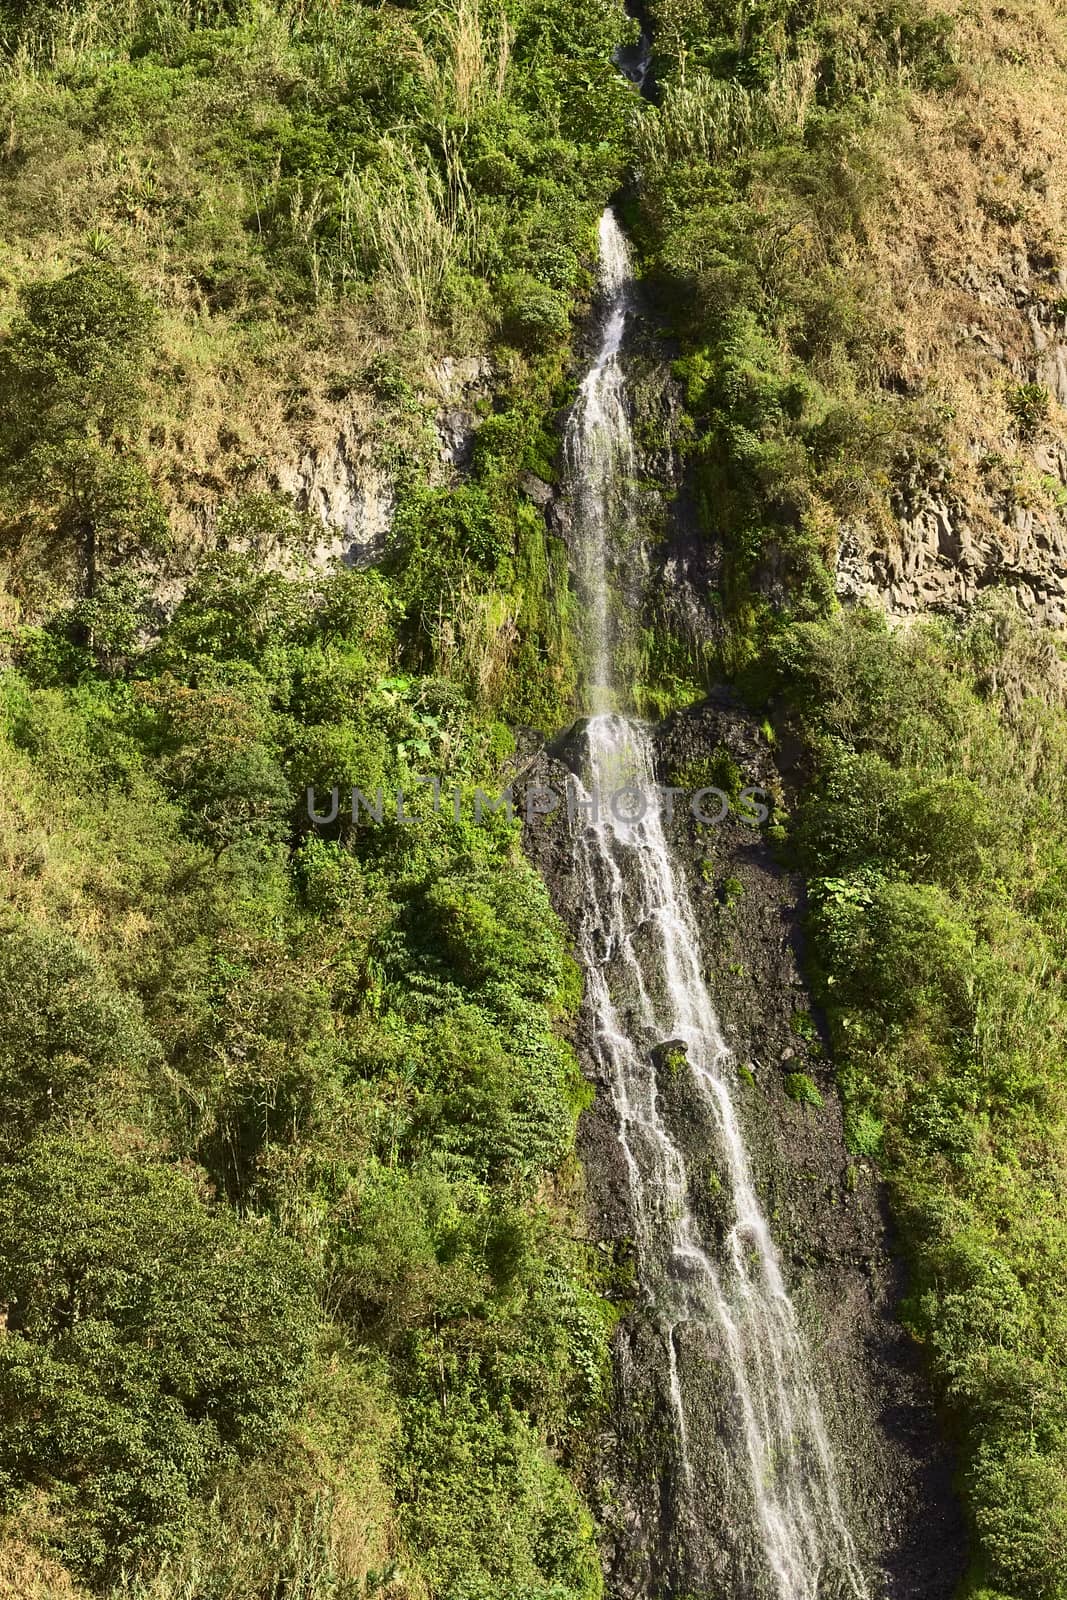 The waterfall called El Cabello Del Virgen (The Virgin's Hair) in the small town of Banos in Ecuador